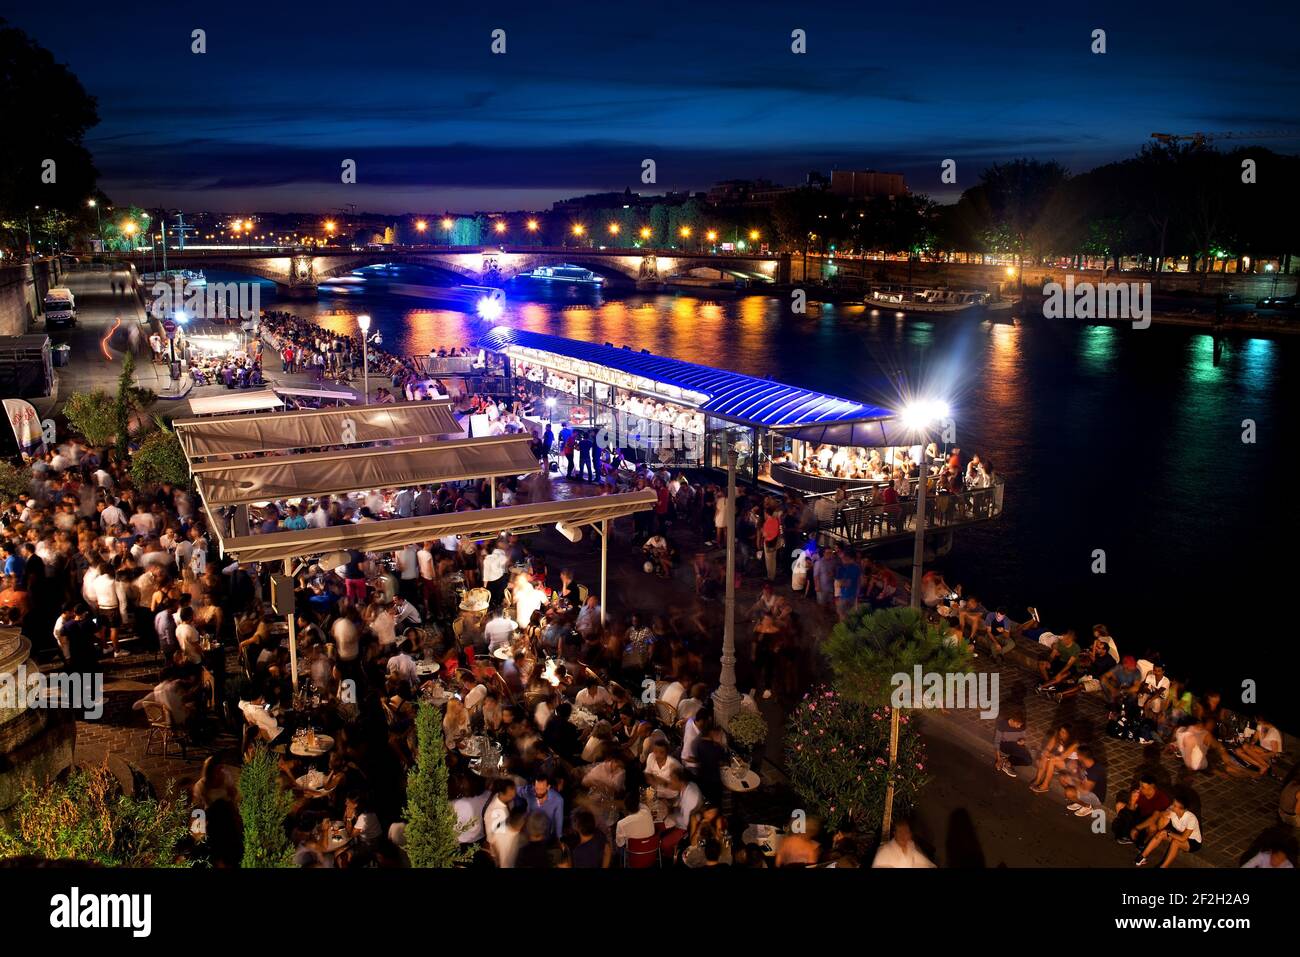 PARIS, FRANCE - AUGUST 25, 2016. Parisian summer cafe on the bank of river Seine at night, France Stock Photo